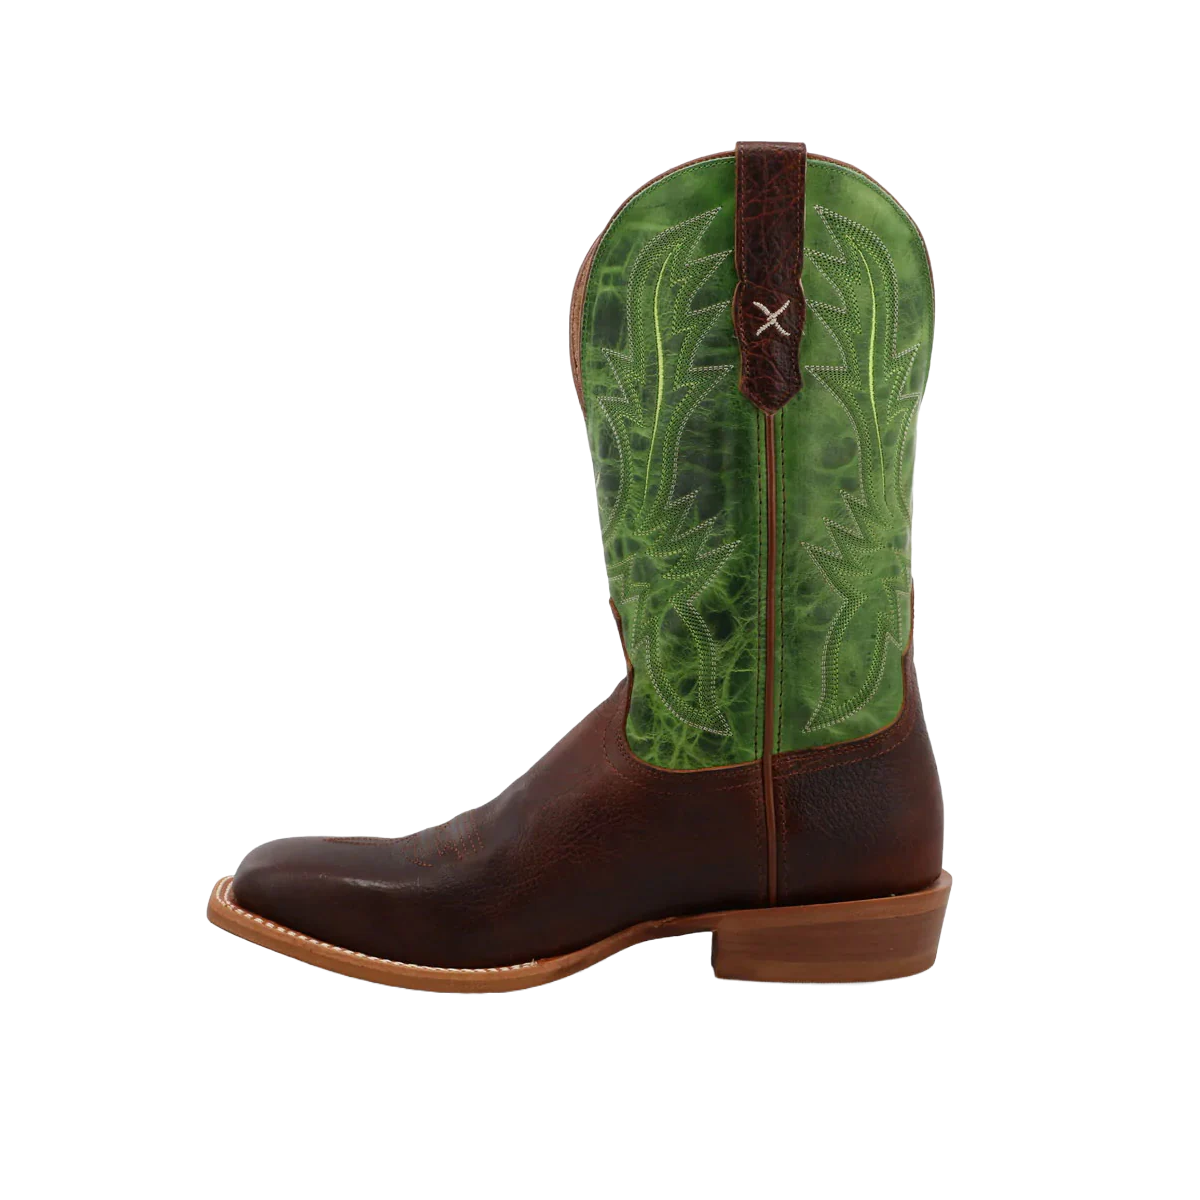 Twisted X Men's 12 Inch Rancher Sequoia & Cactus Square Toe Boots MRAL030